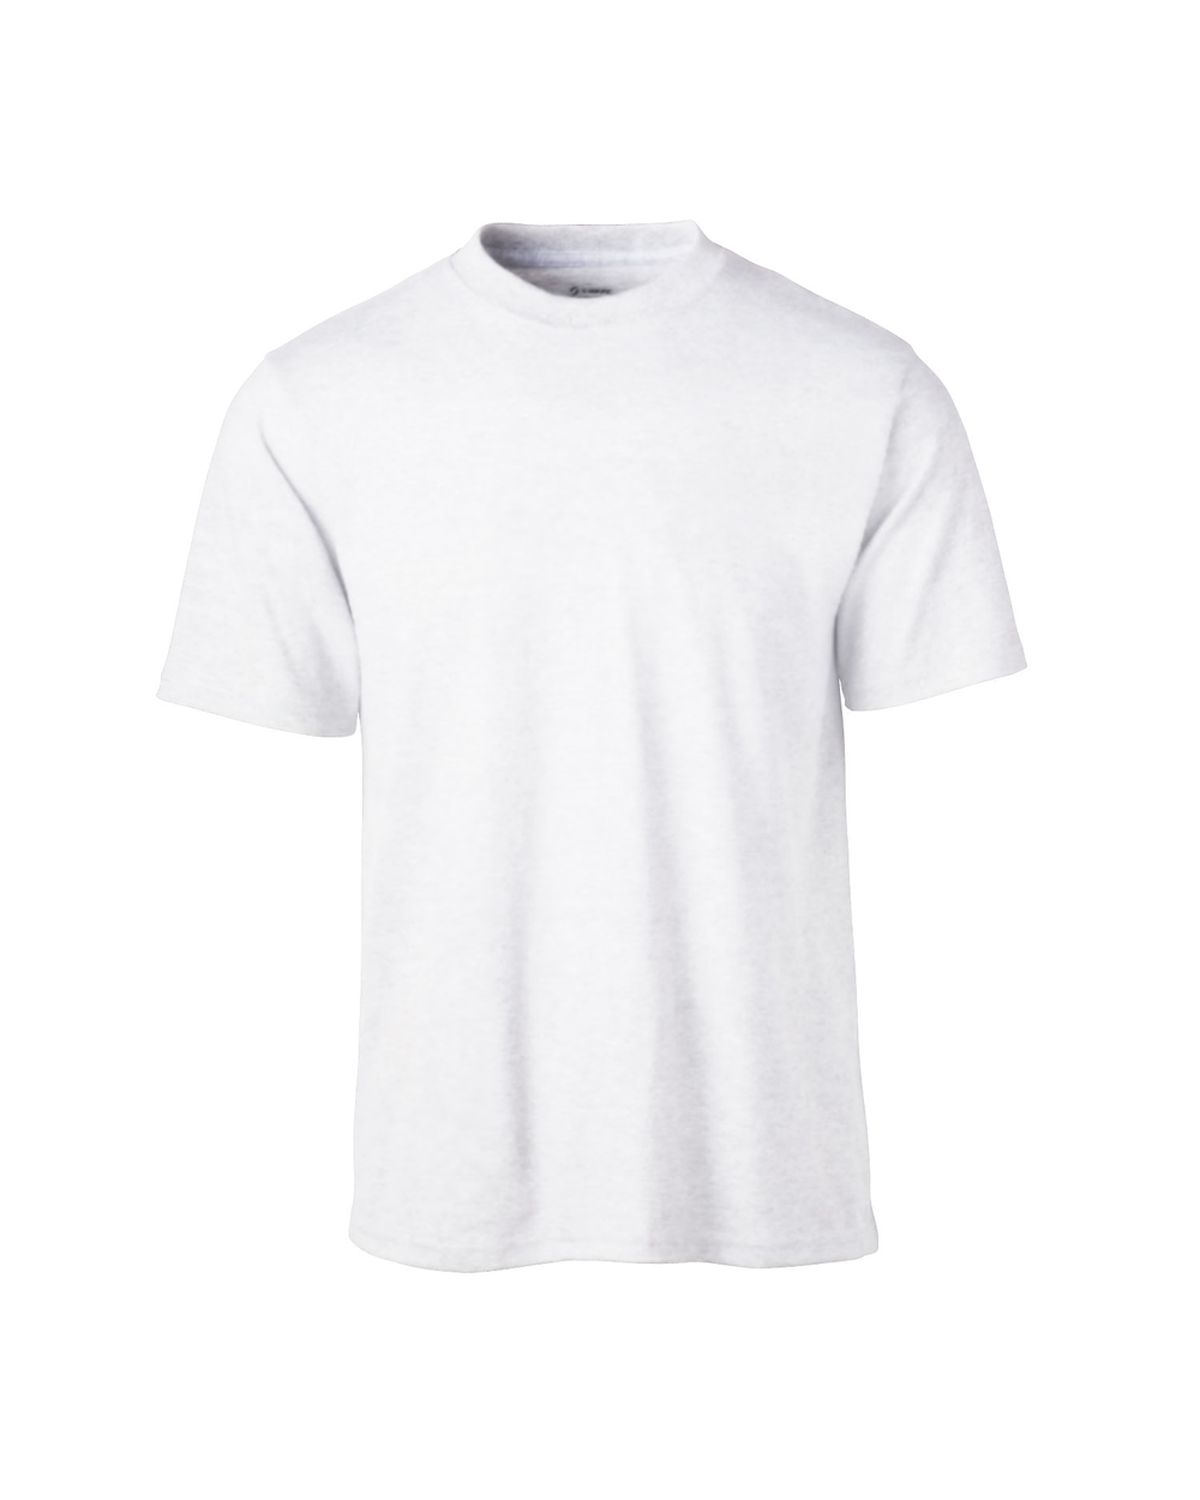 'Soffe M252 Adult Midweight 50/50 Tee'